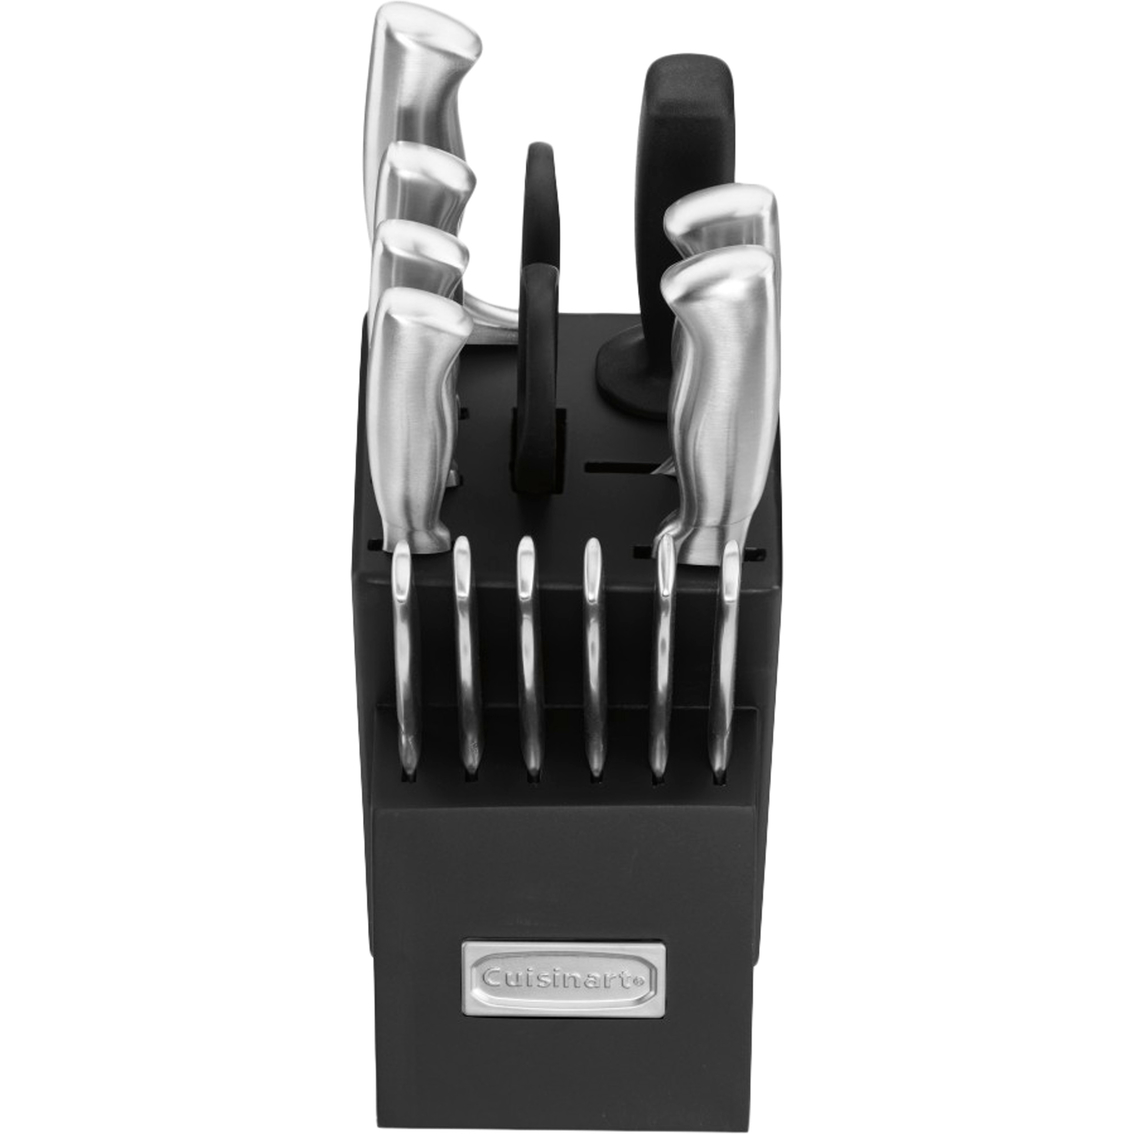 Cuisinart 15 Pc. Stainless Steel Hollow Handle Cutlery Block Set, Cutlery, Household